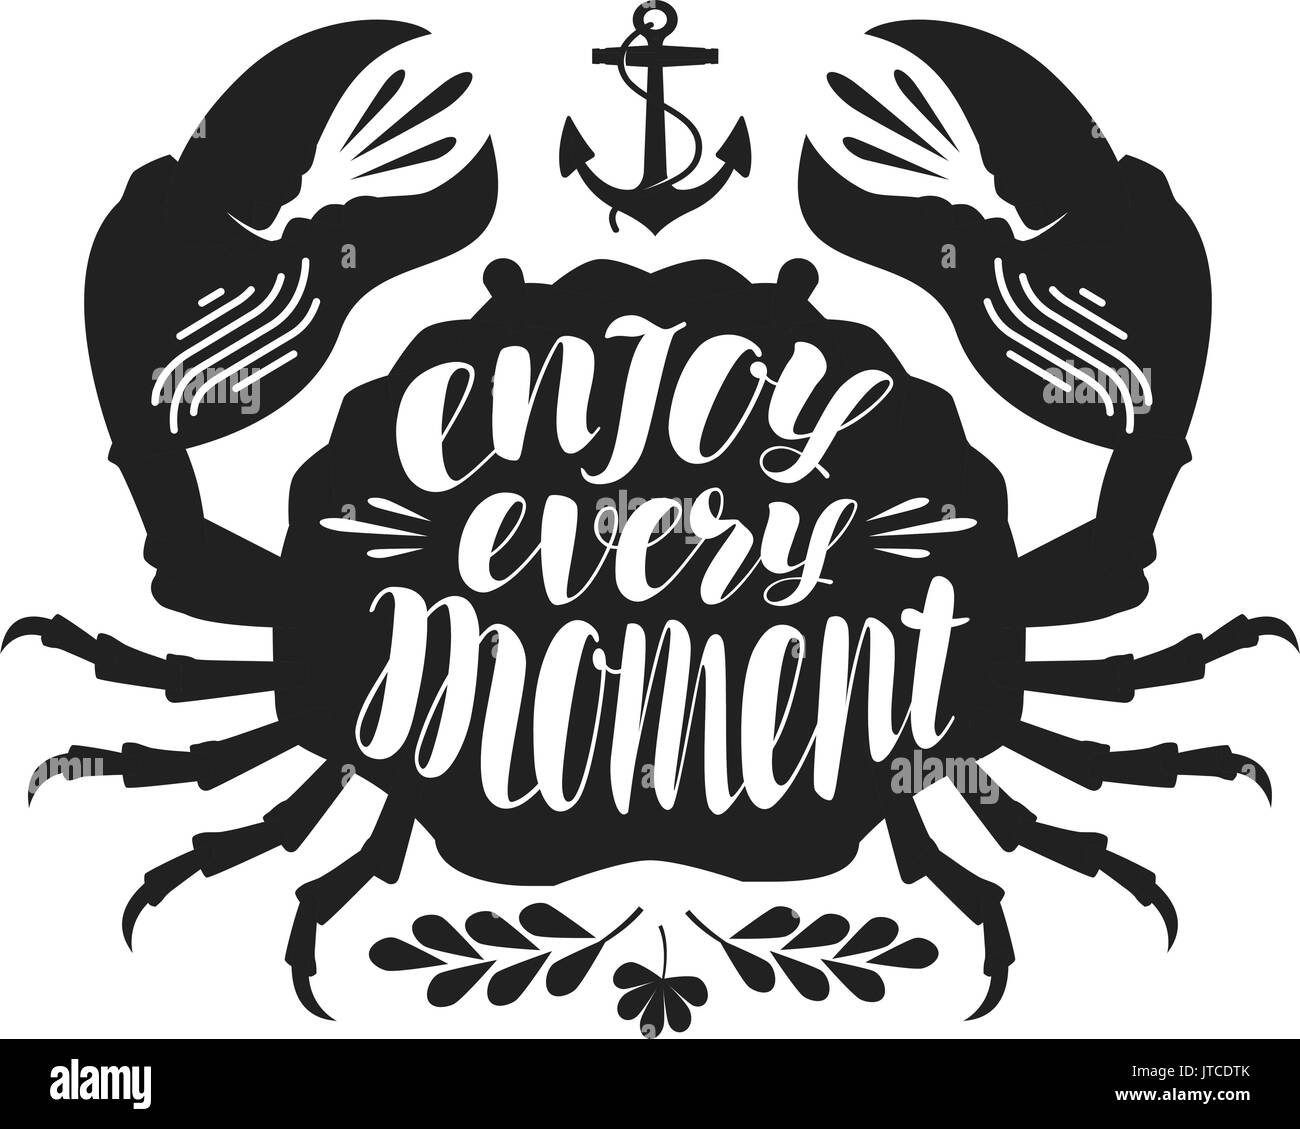 Crab, typographic design. Enjoy every moment, lettering. Travel, journey concept. Vector illustration Stock Vector